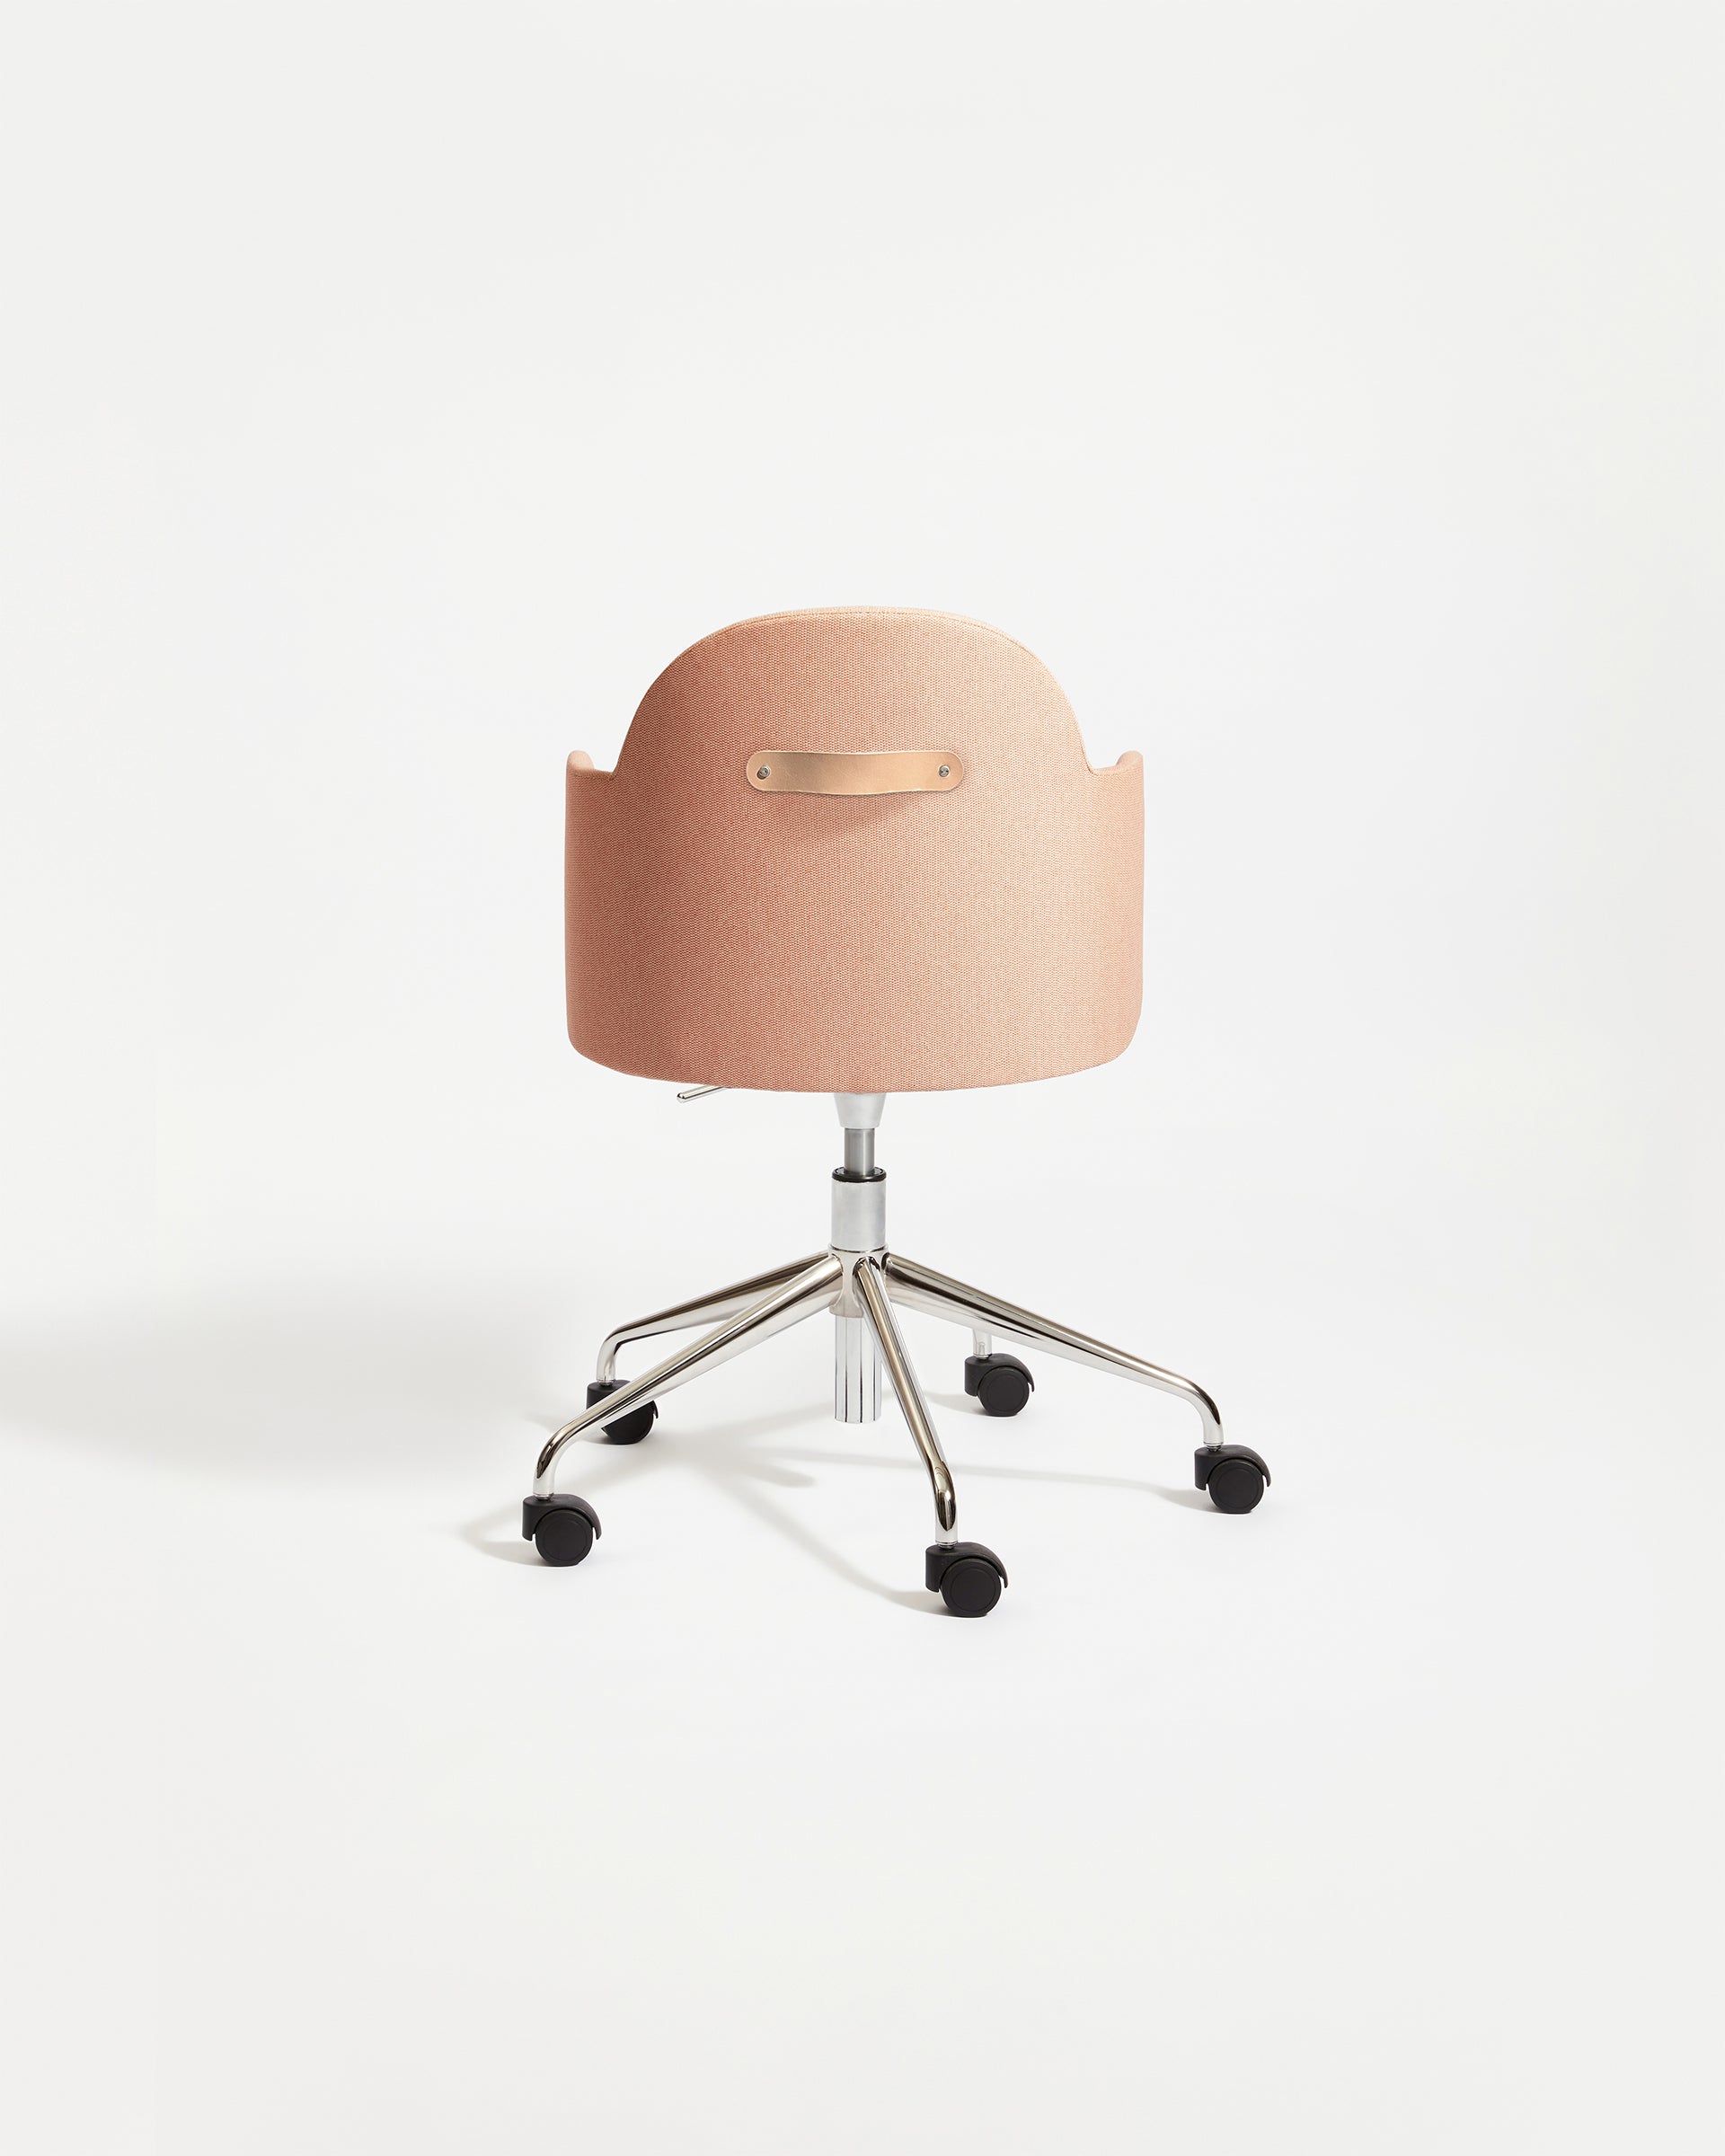 Potato Armchair Swivel Gaslift with Castors Chrome Base | Office or Dining Tub Chair with Handle | Gibson Karlo | DesignByThem ** HF2 Messenger - 097 Krill